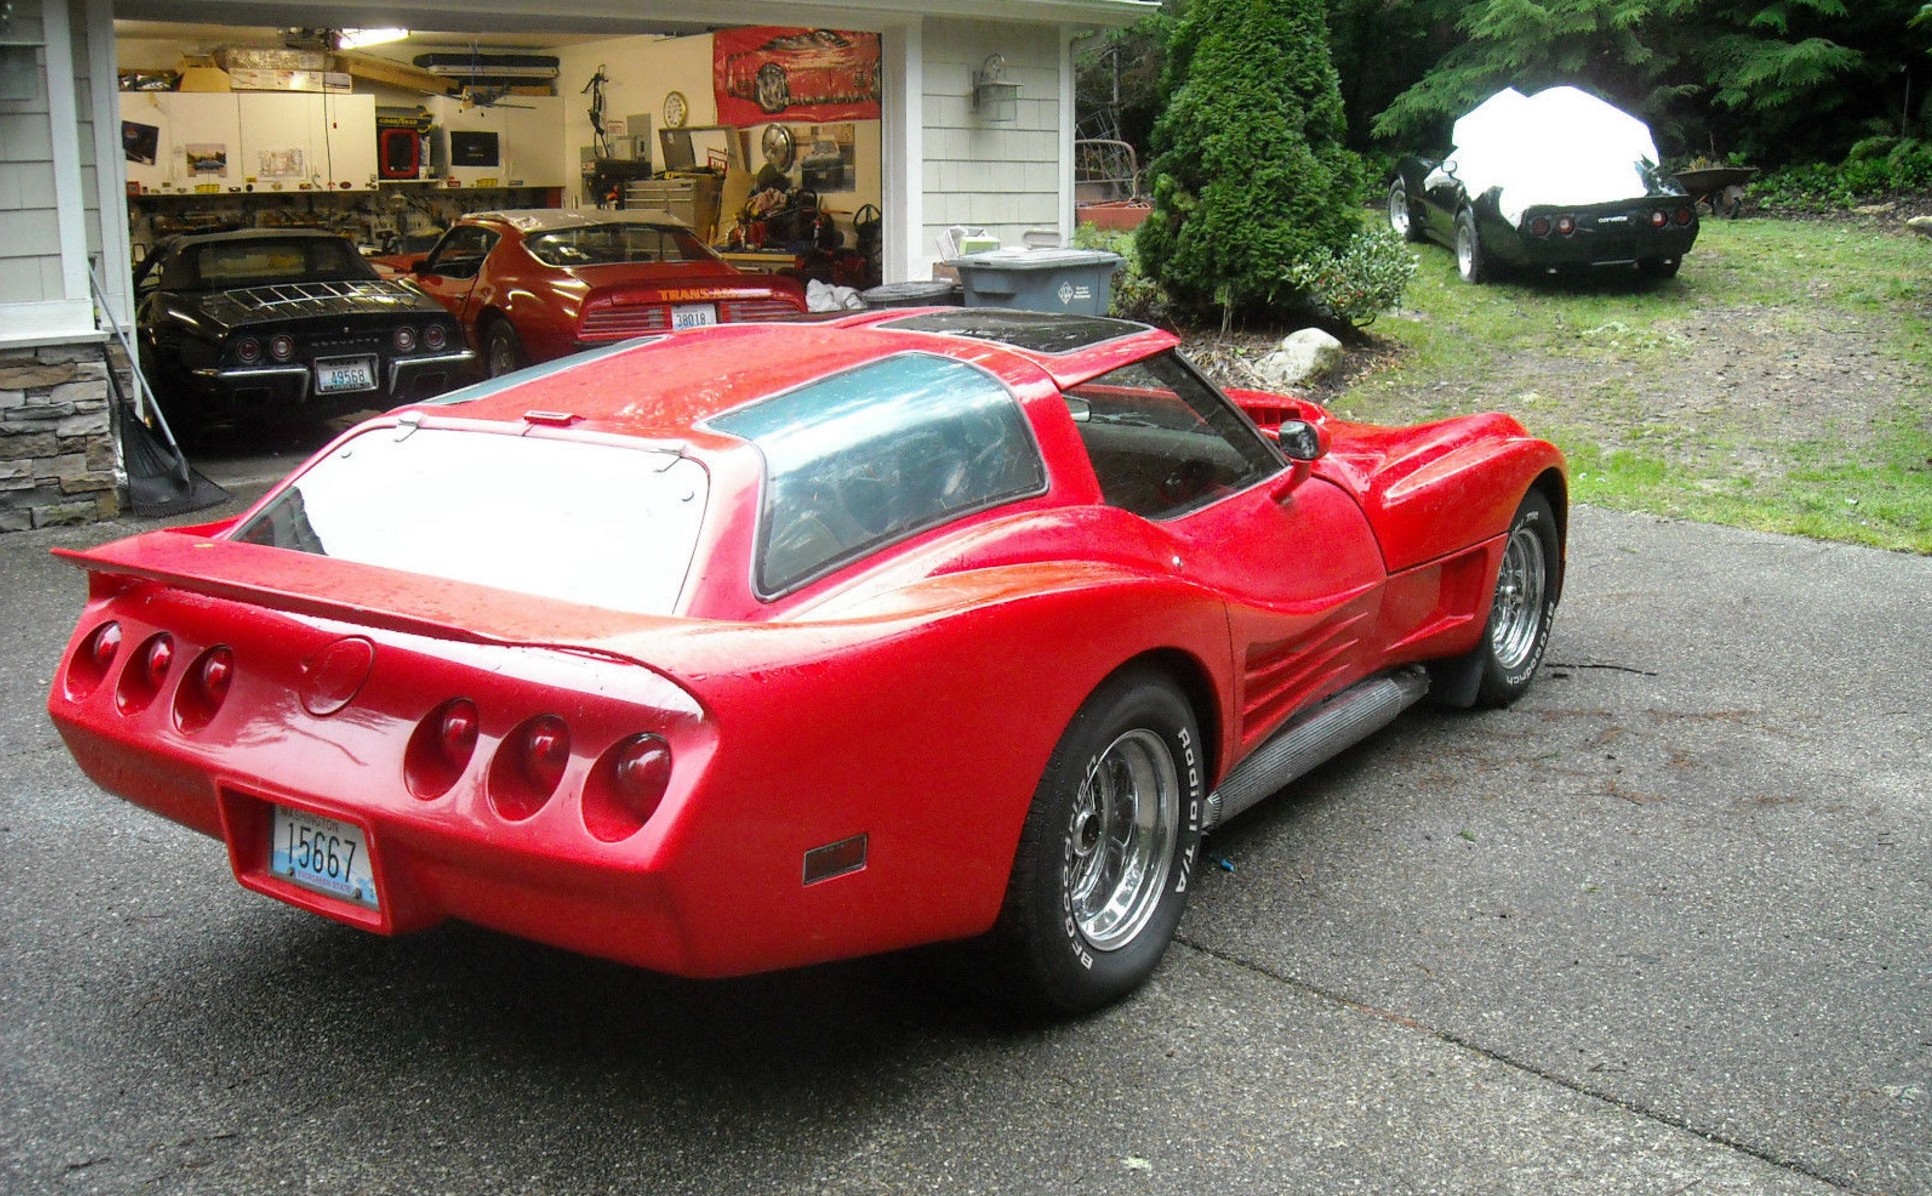 1976 Corvette C3 customized to a wagon body style made from fiberglass, fea...